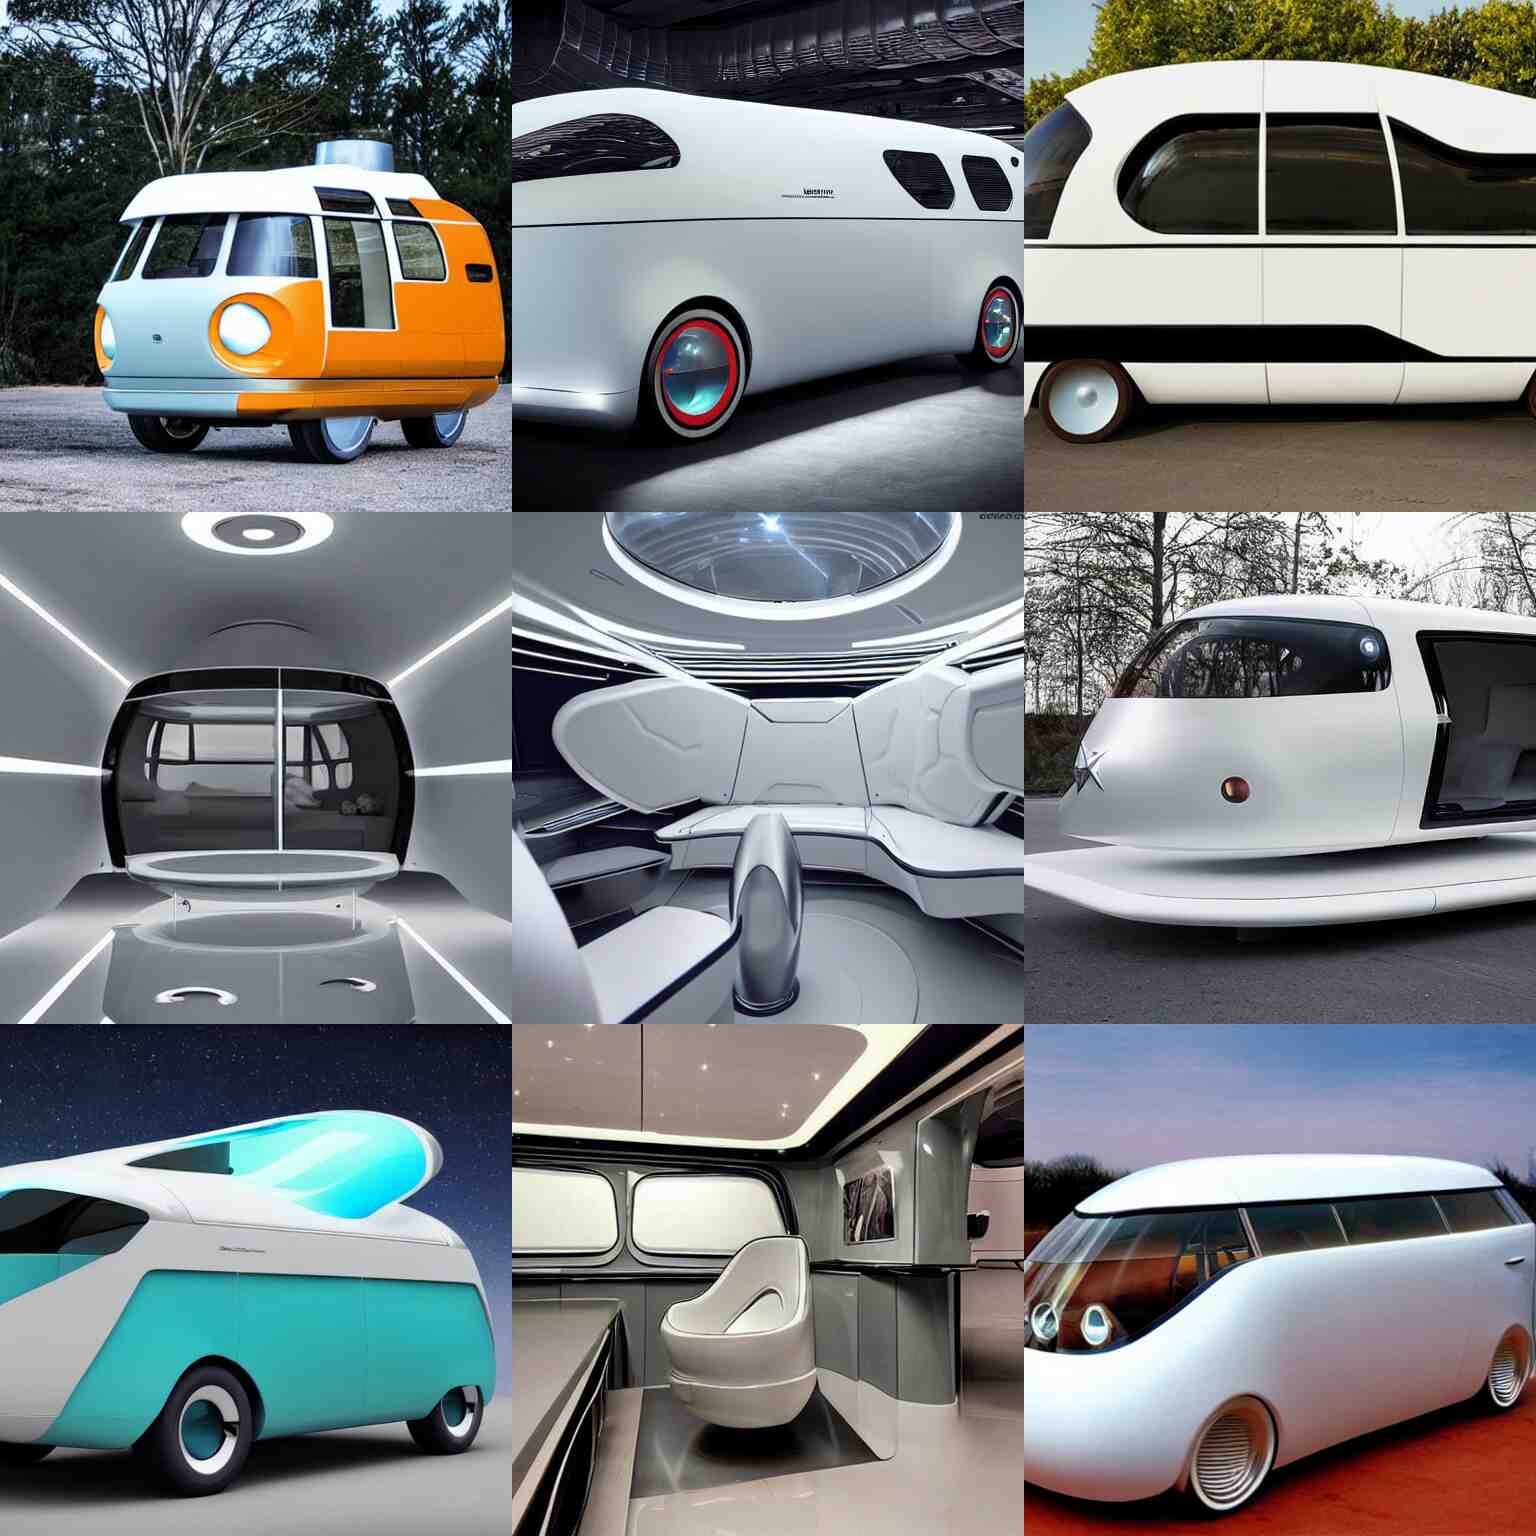 Tutorial On How To Classify Vehicles In Photos With An API